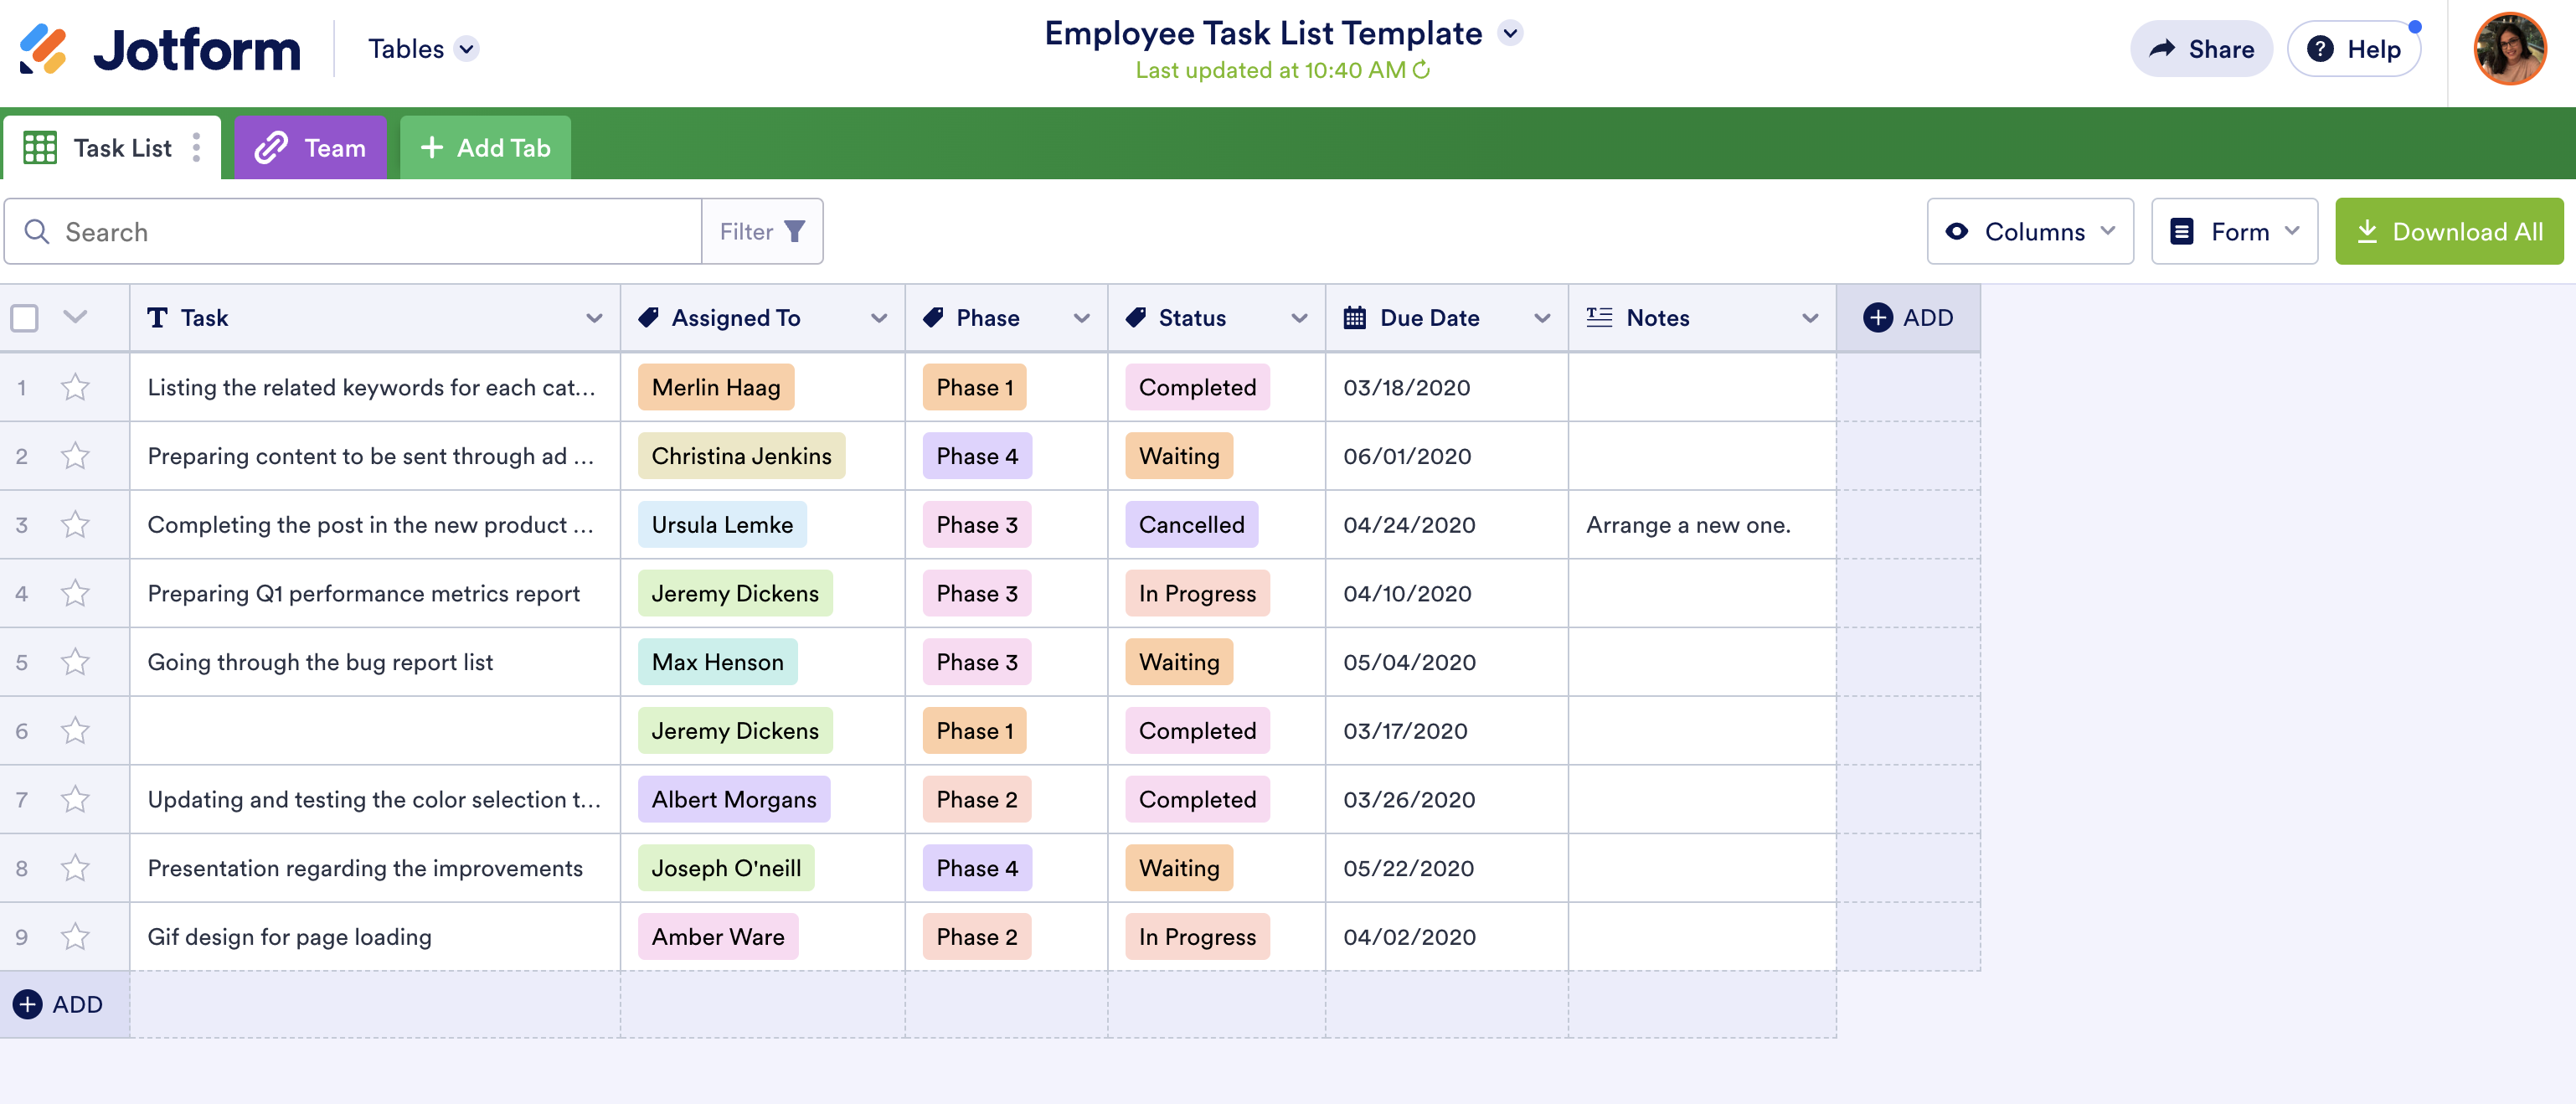 Image of Employee Task List Template in Jotform Tables